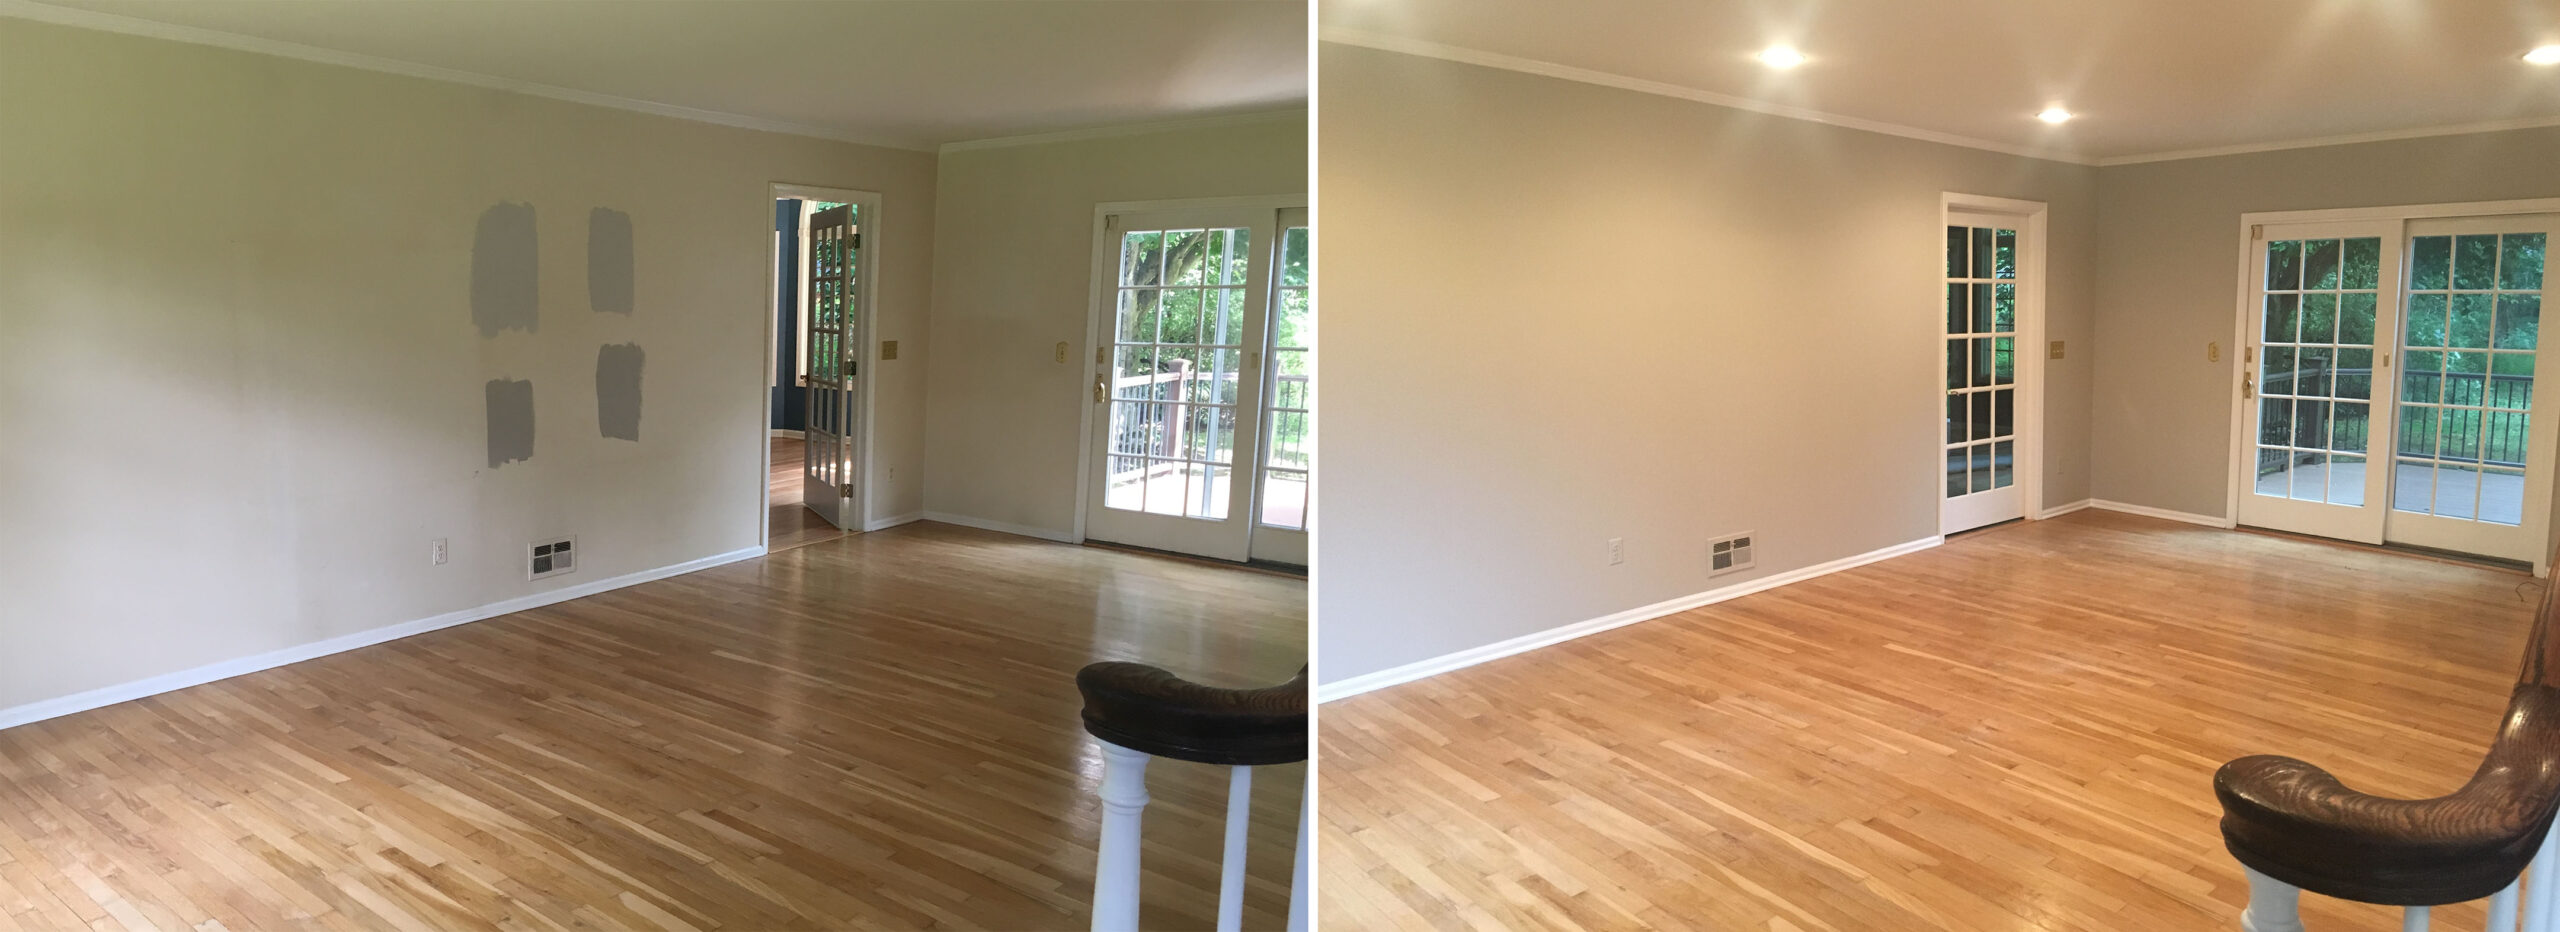 Living Room Painting Before and After Basking Ridge NJ